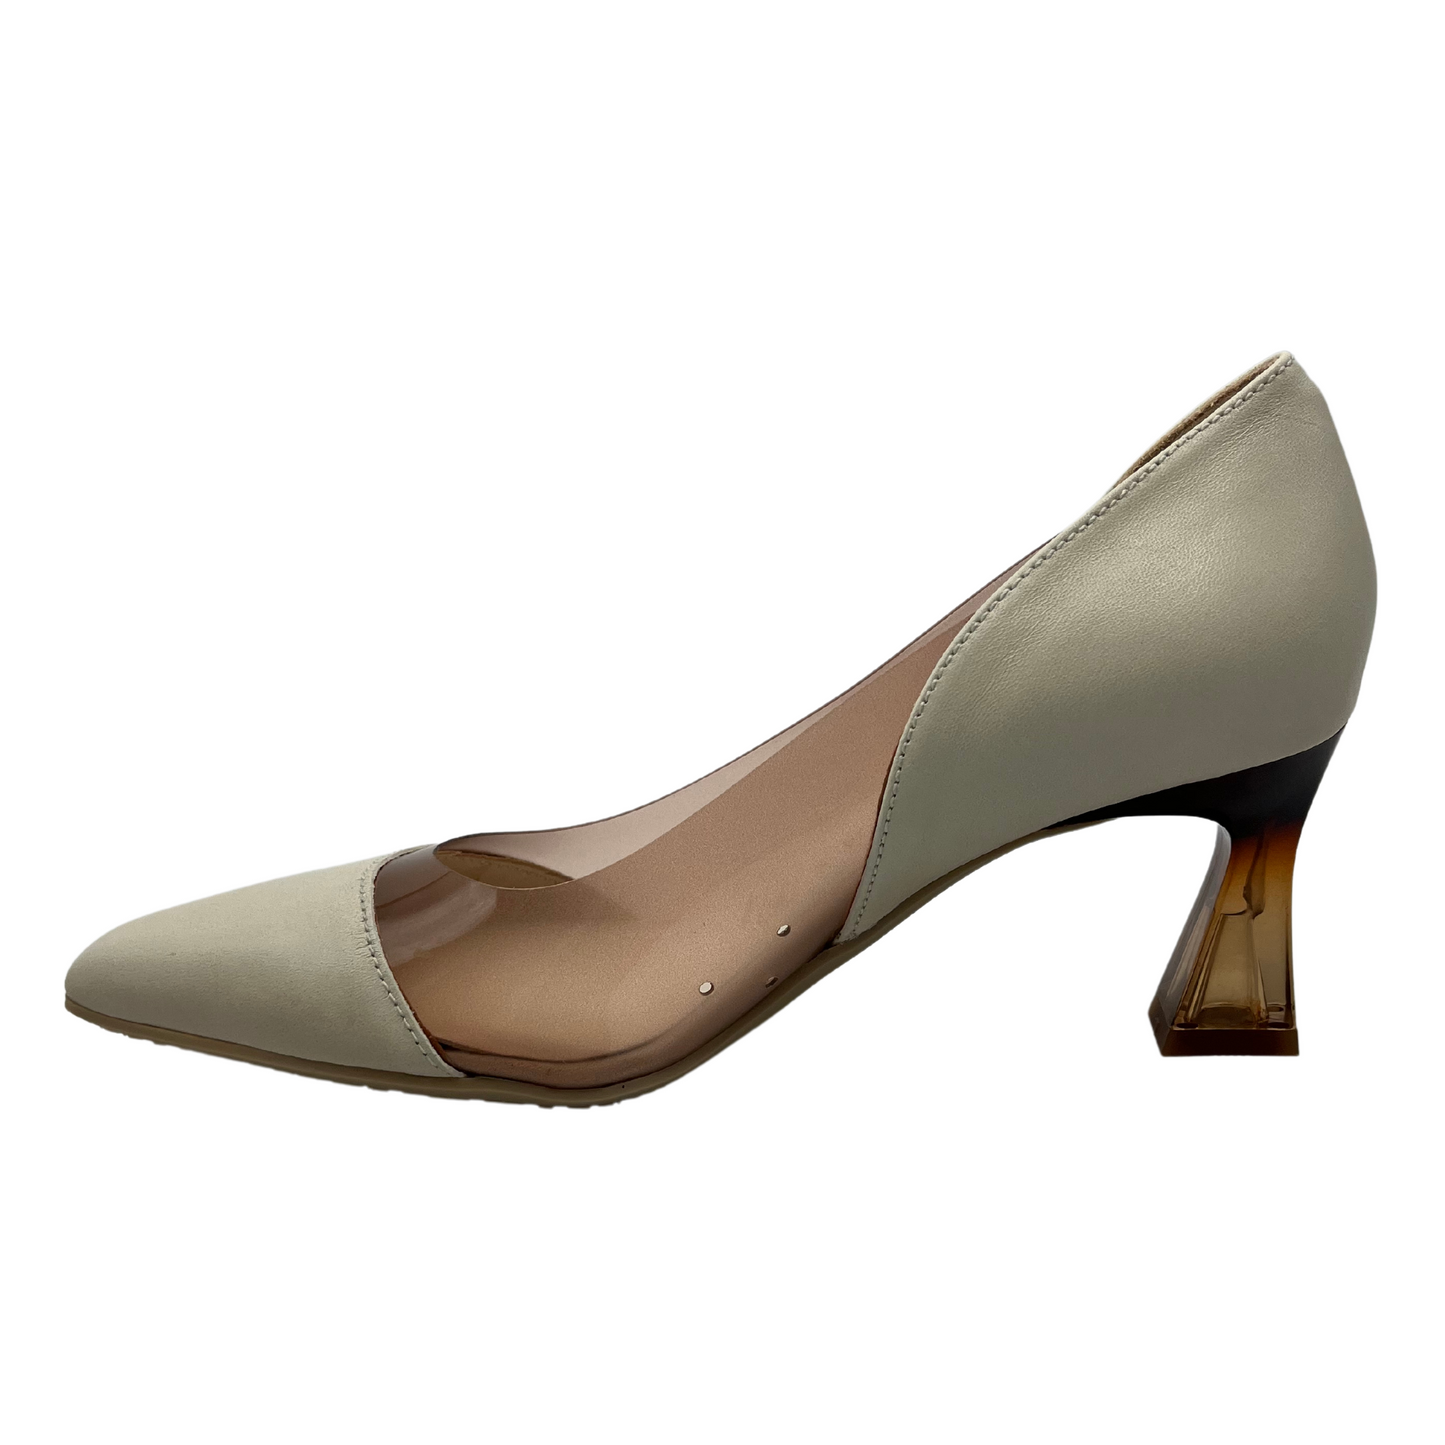 Left facing view of white and nude pump with pointed toe and flared heel